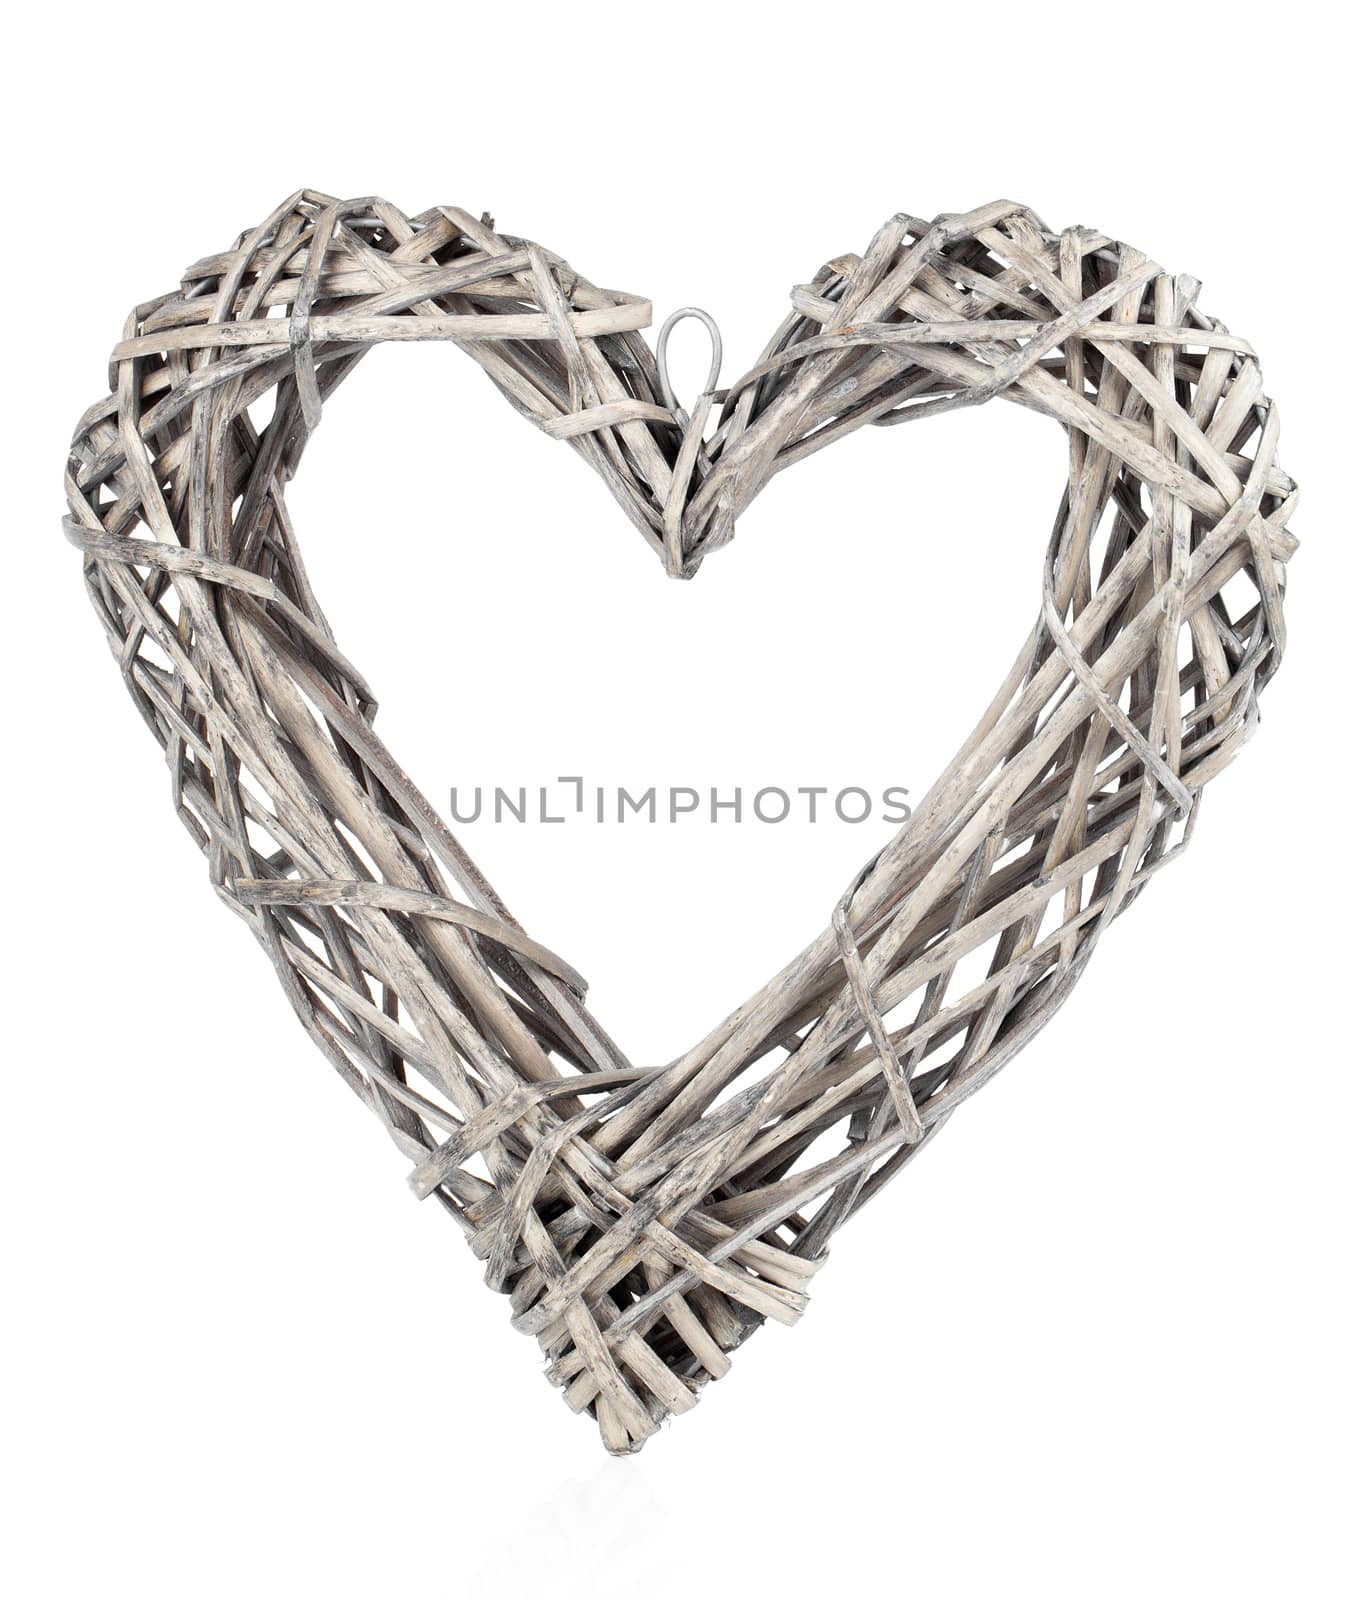 Heart shaped decoration made of wood, over white background by motorolka